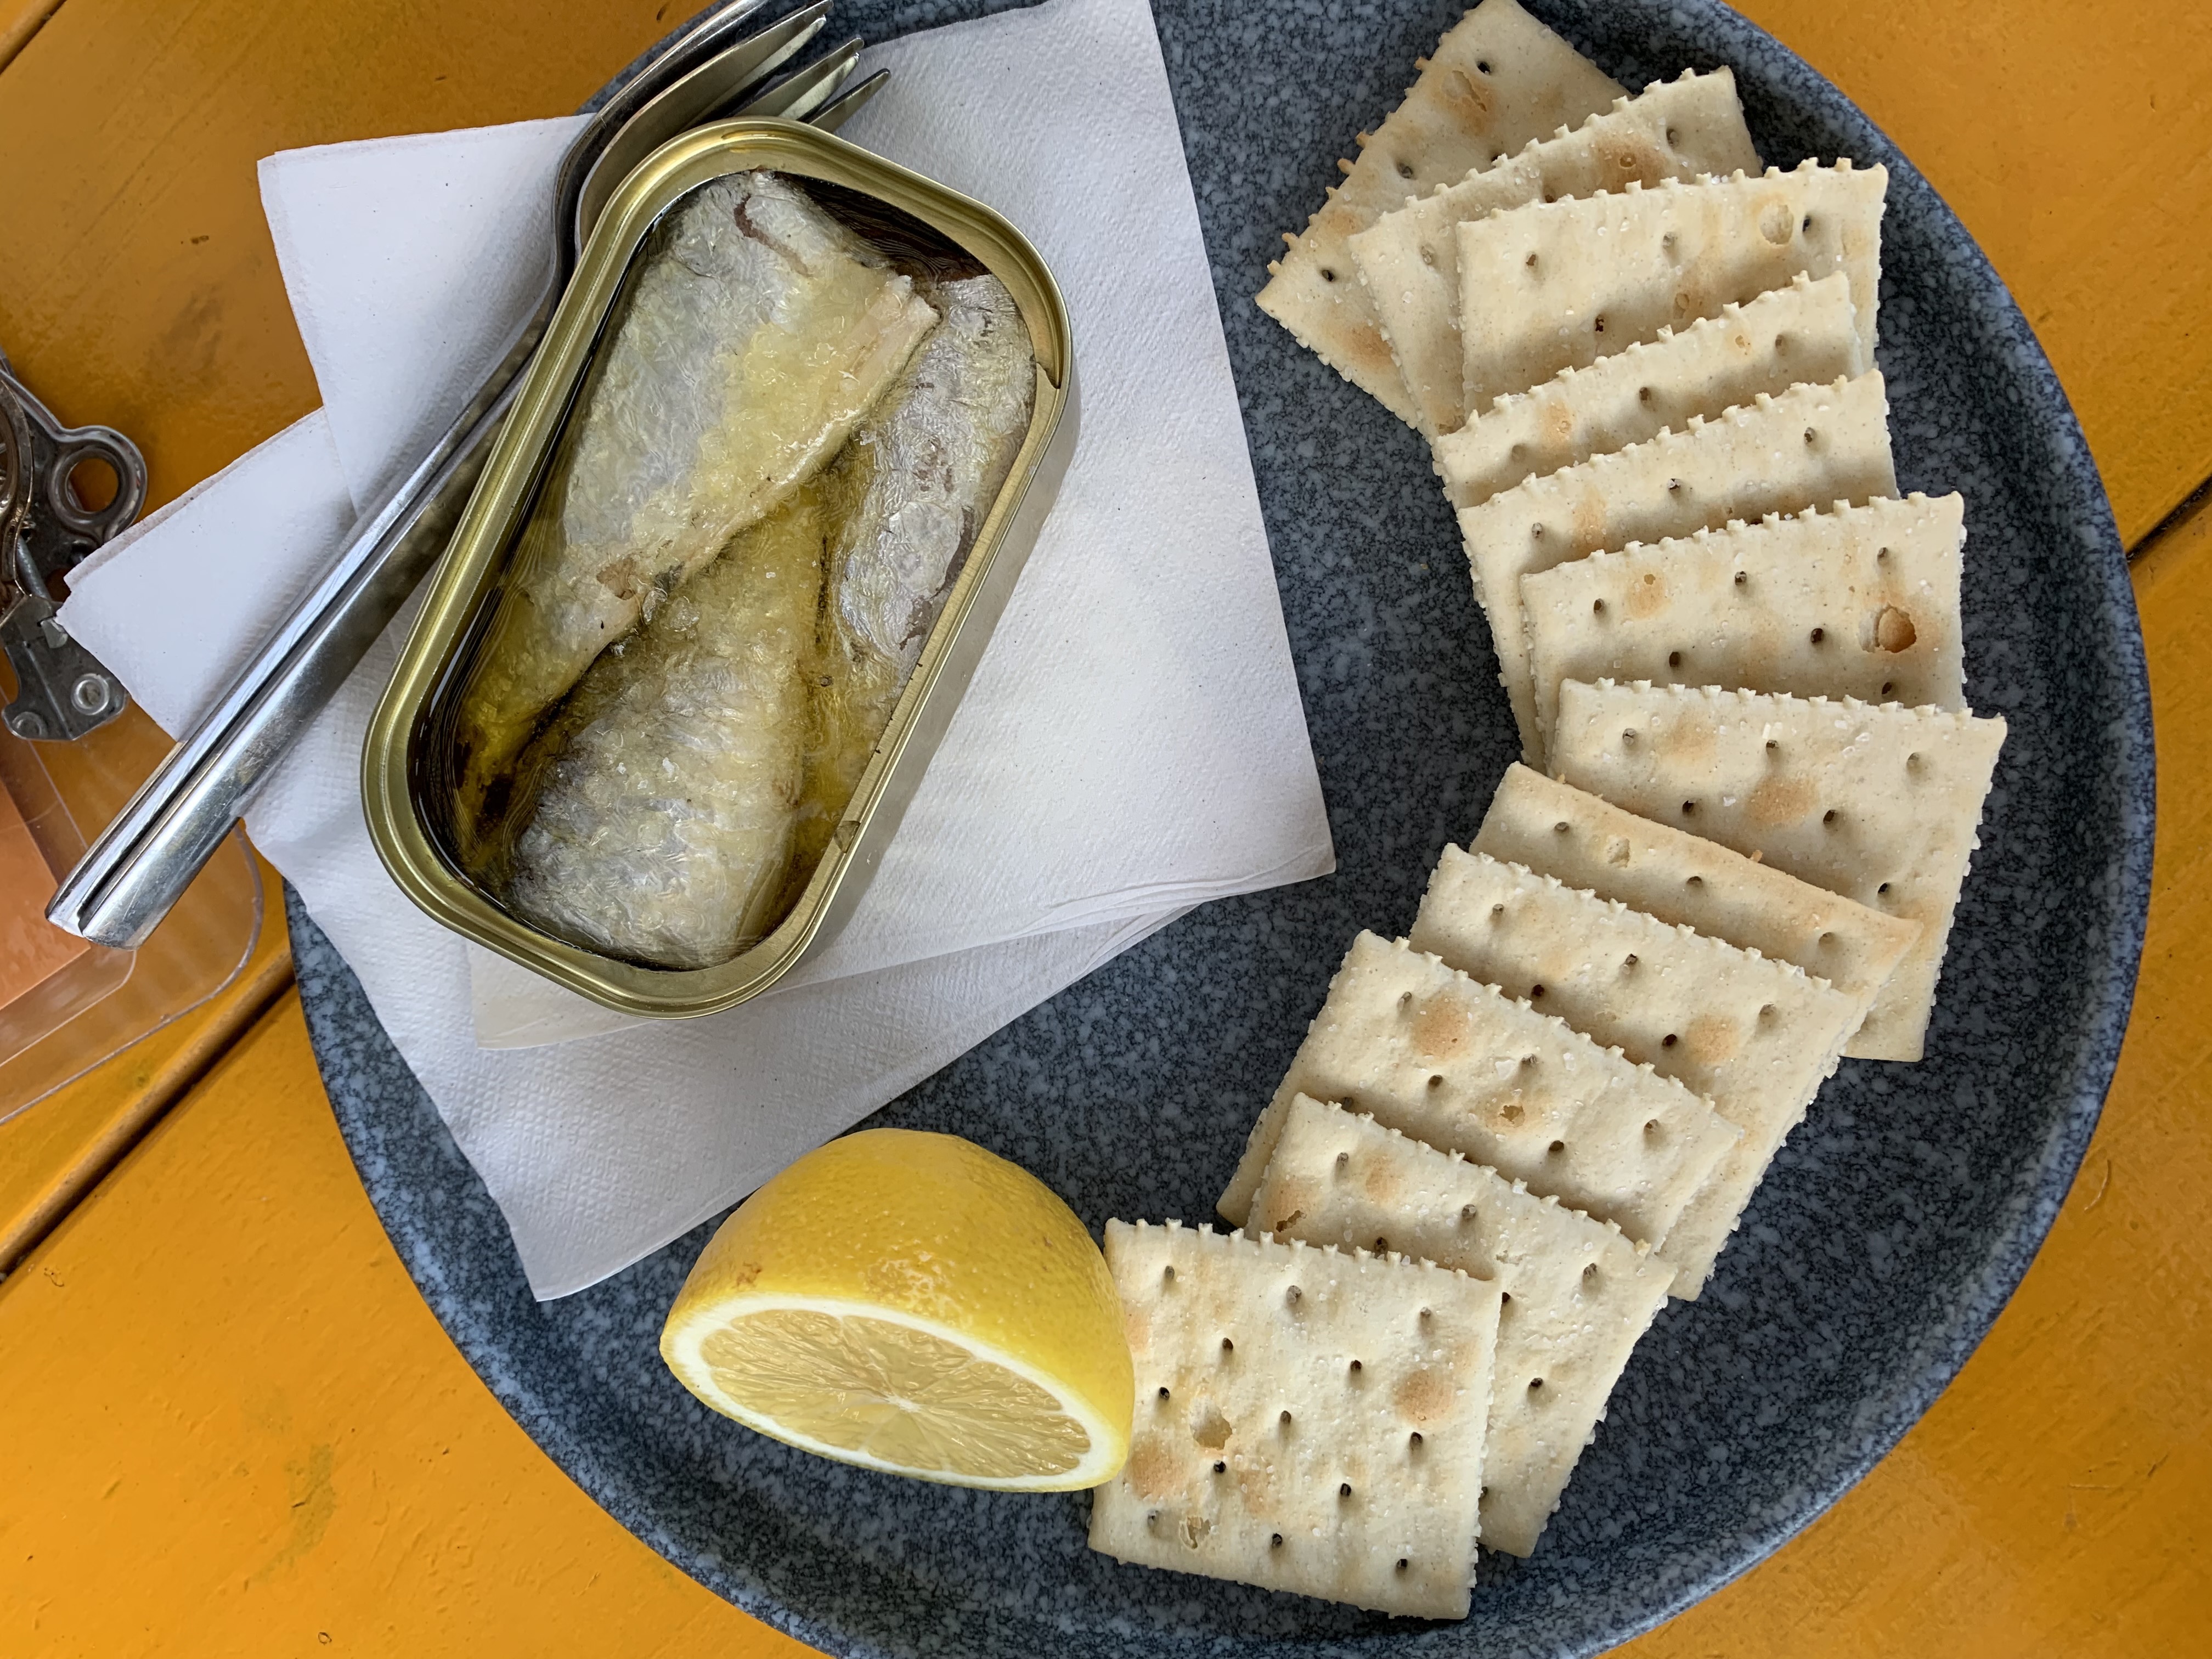 A dark gray plate of tinned sardines, a row of crackers, and a half-lemon on an orange table.